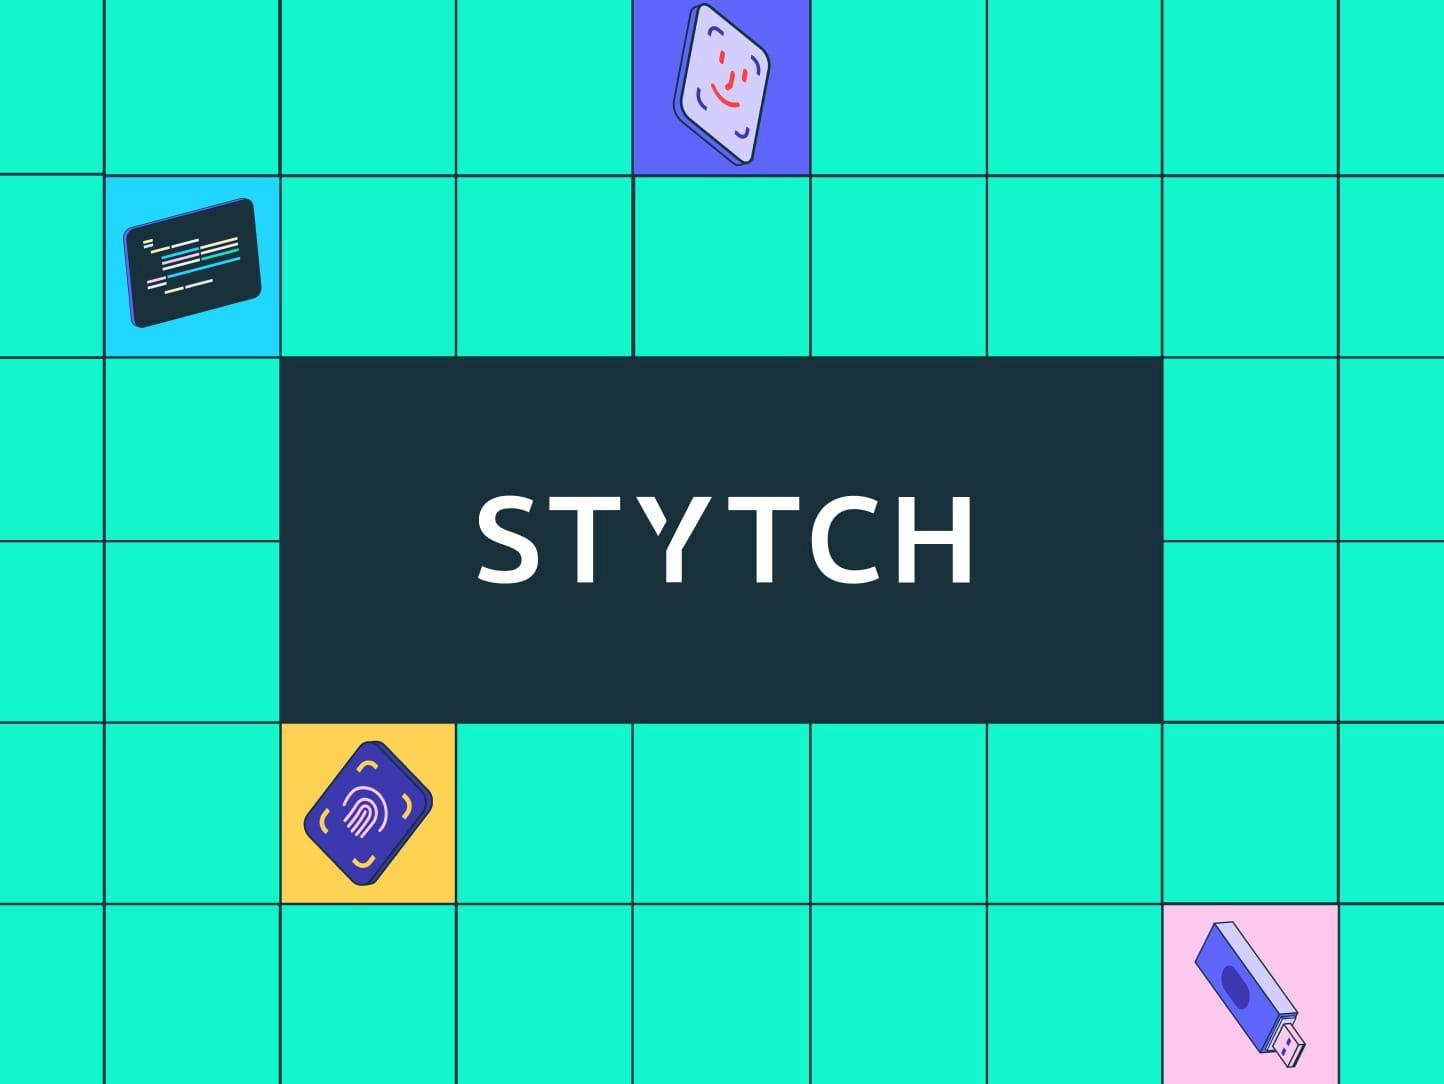 Stytch feature new